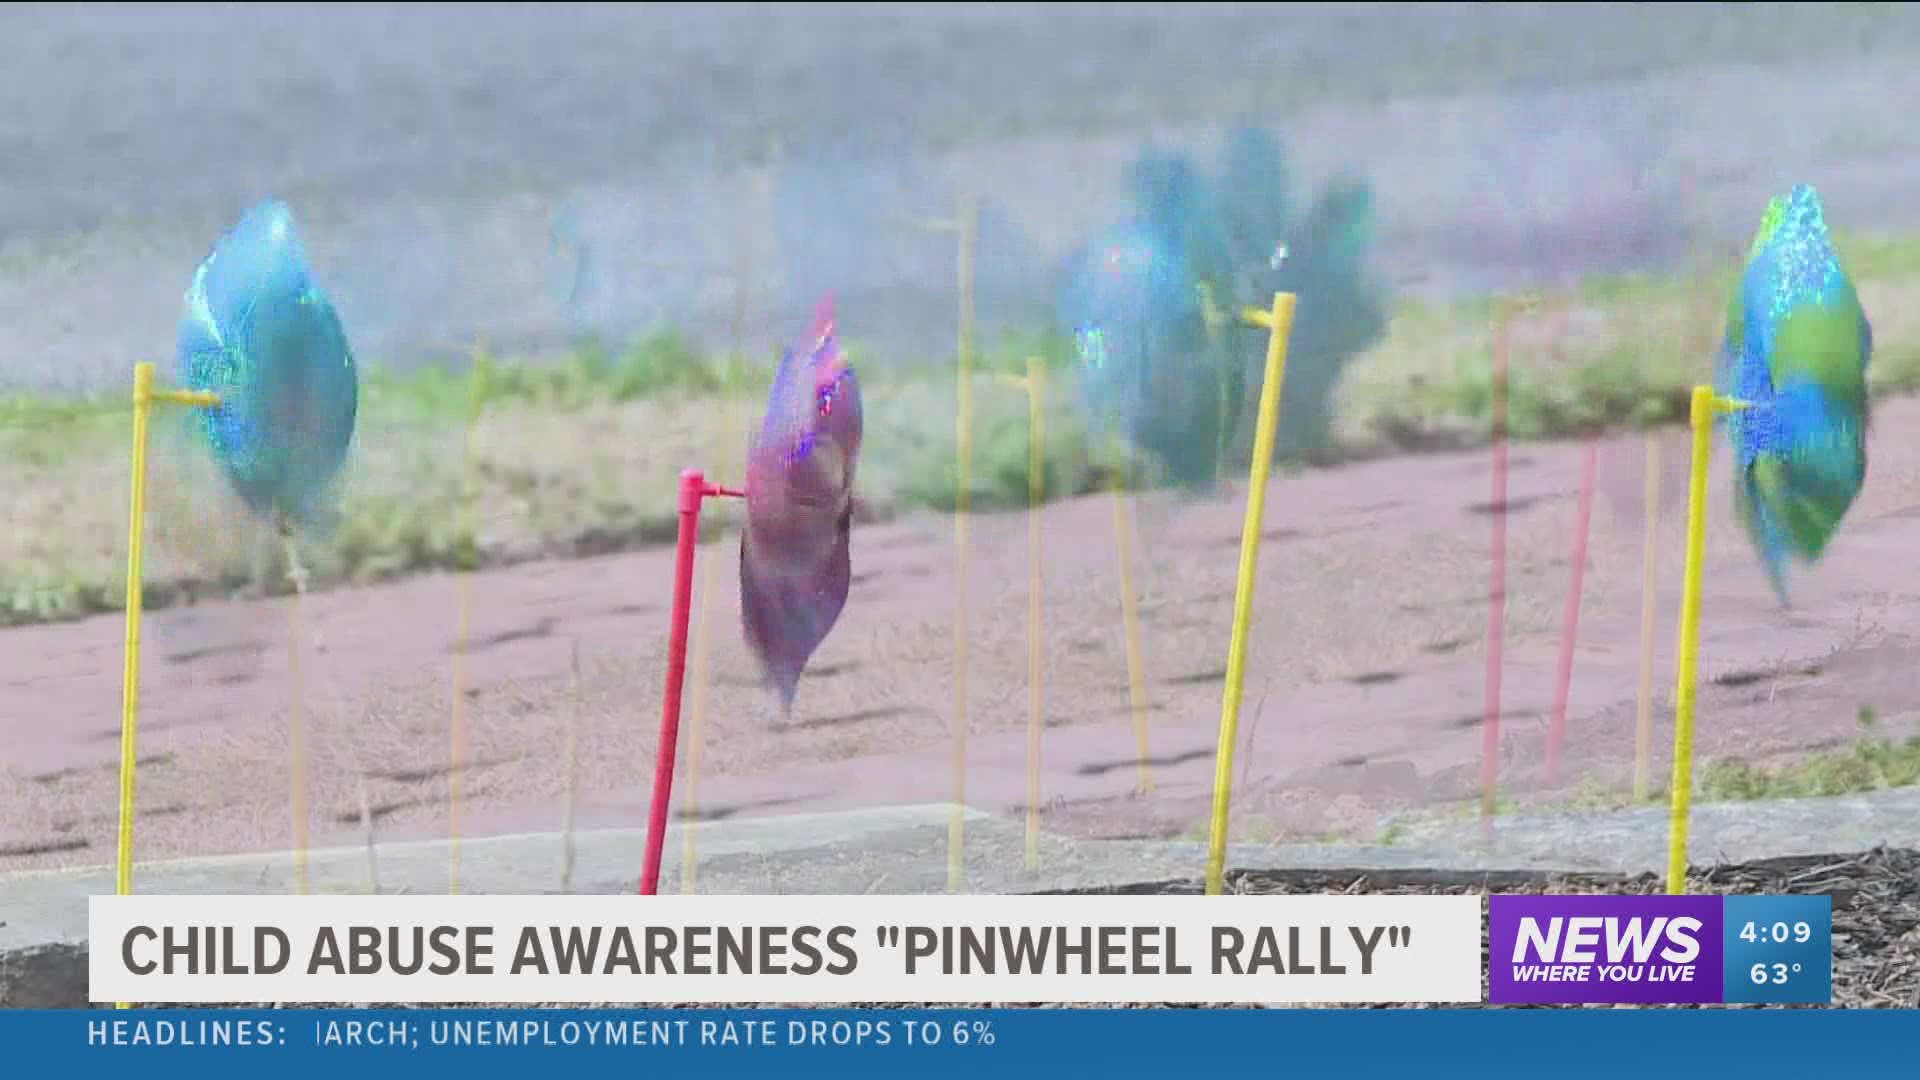 This event brings light to ending child abuse as businesses and federal agencies around town place hundreds of pinwheels in their yards to show their support.